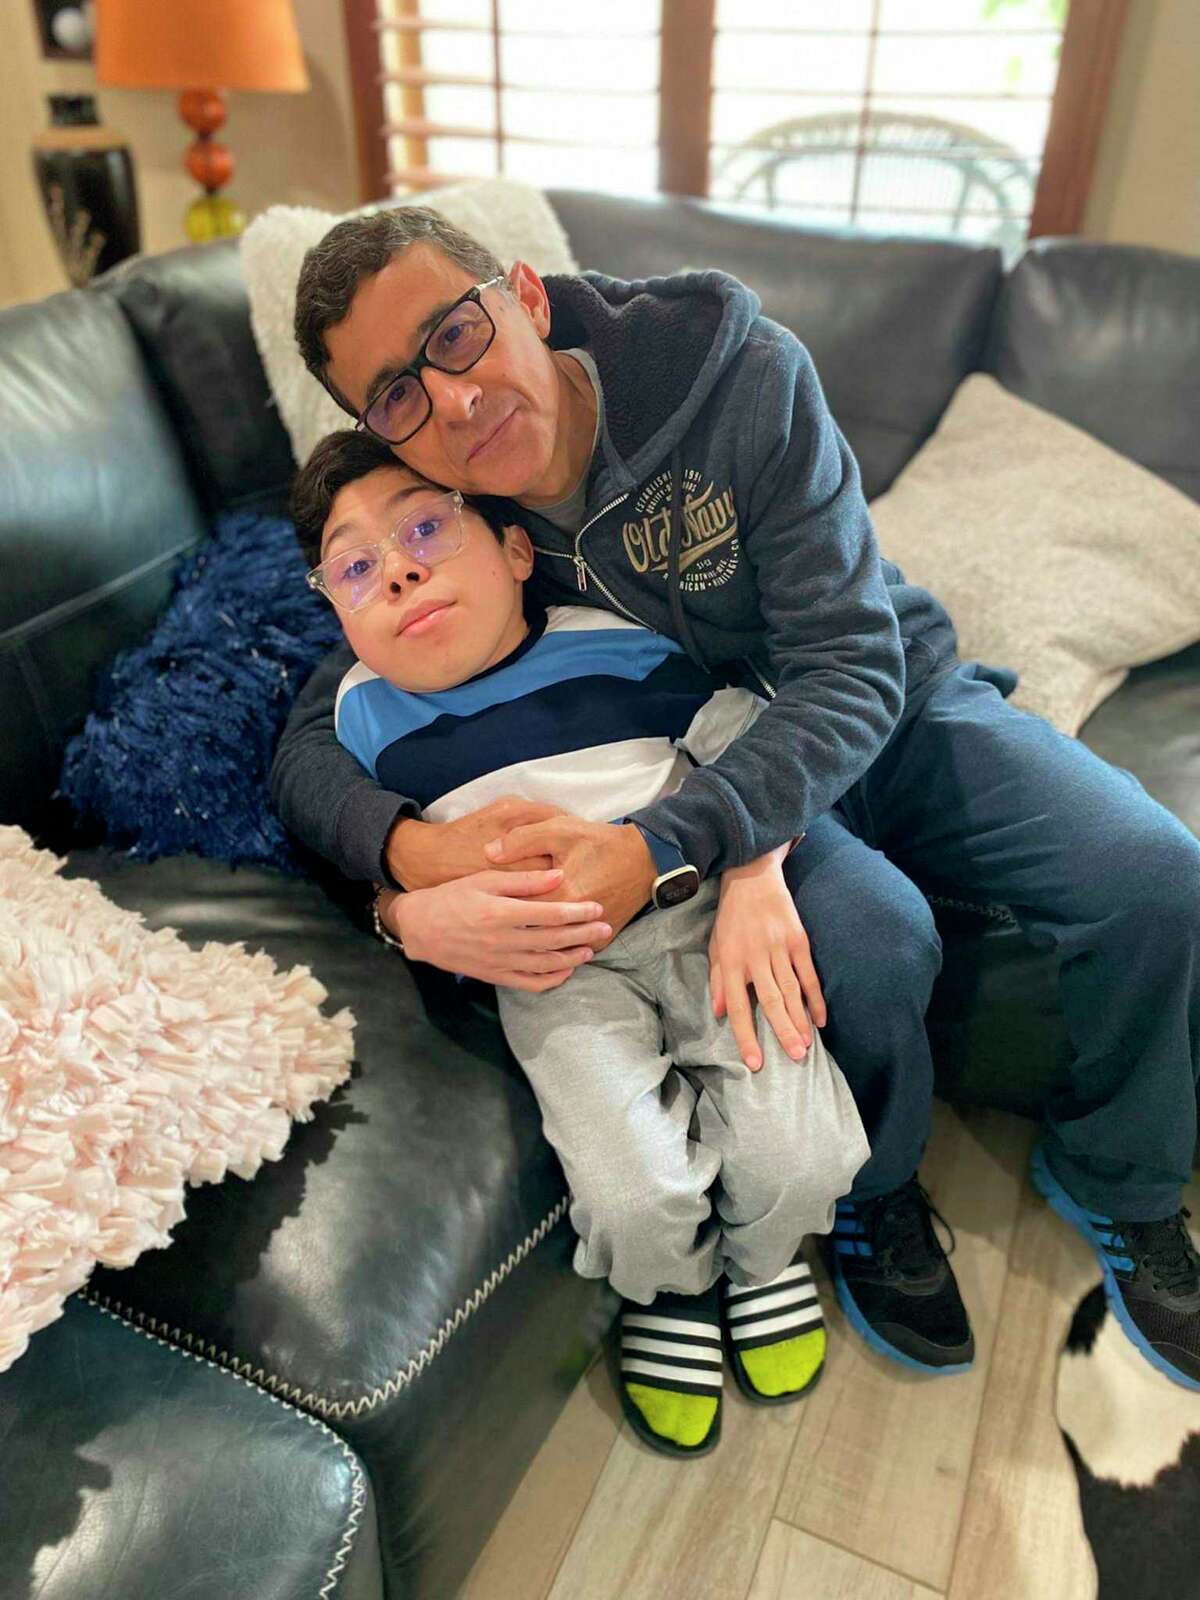 In this handout photo provided by Maria Elena Cardenas, Gustavo Cardenas, one of six oil executives jailed in Venezuela, poses for a photo with his son Sergio, in their home in Houston, Wednesday, March 9, 2022. Cardenas expressed happiness to be home after an imprisonment of more than four years that he said “has caused a lot of suffering and pain, much more than I can explain with my words.” But he said he is praying for five colleagues of his company who were not released Tuesday night. Together, the men are known as the “Citgo 6.” (Maria Elena Cardenas via AP)